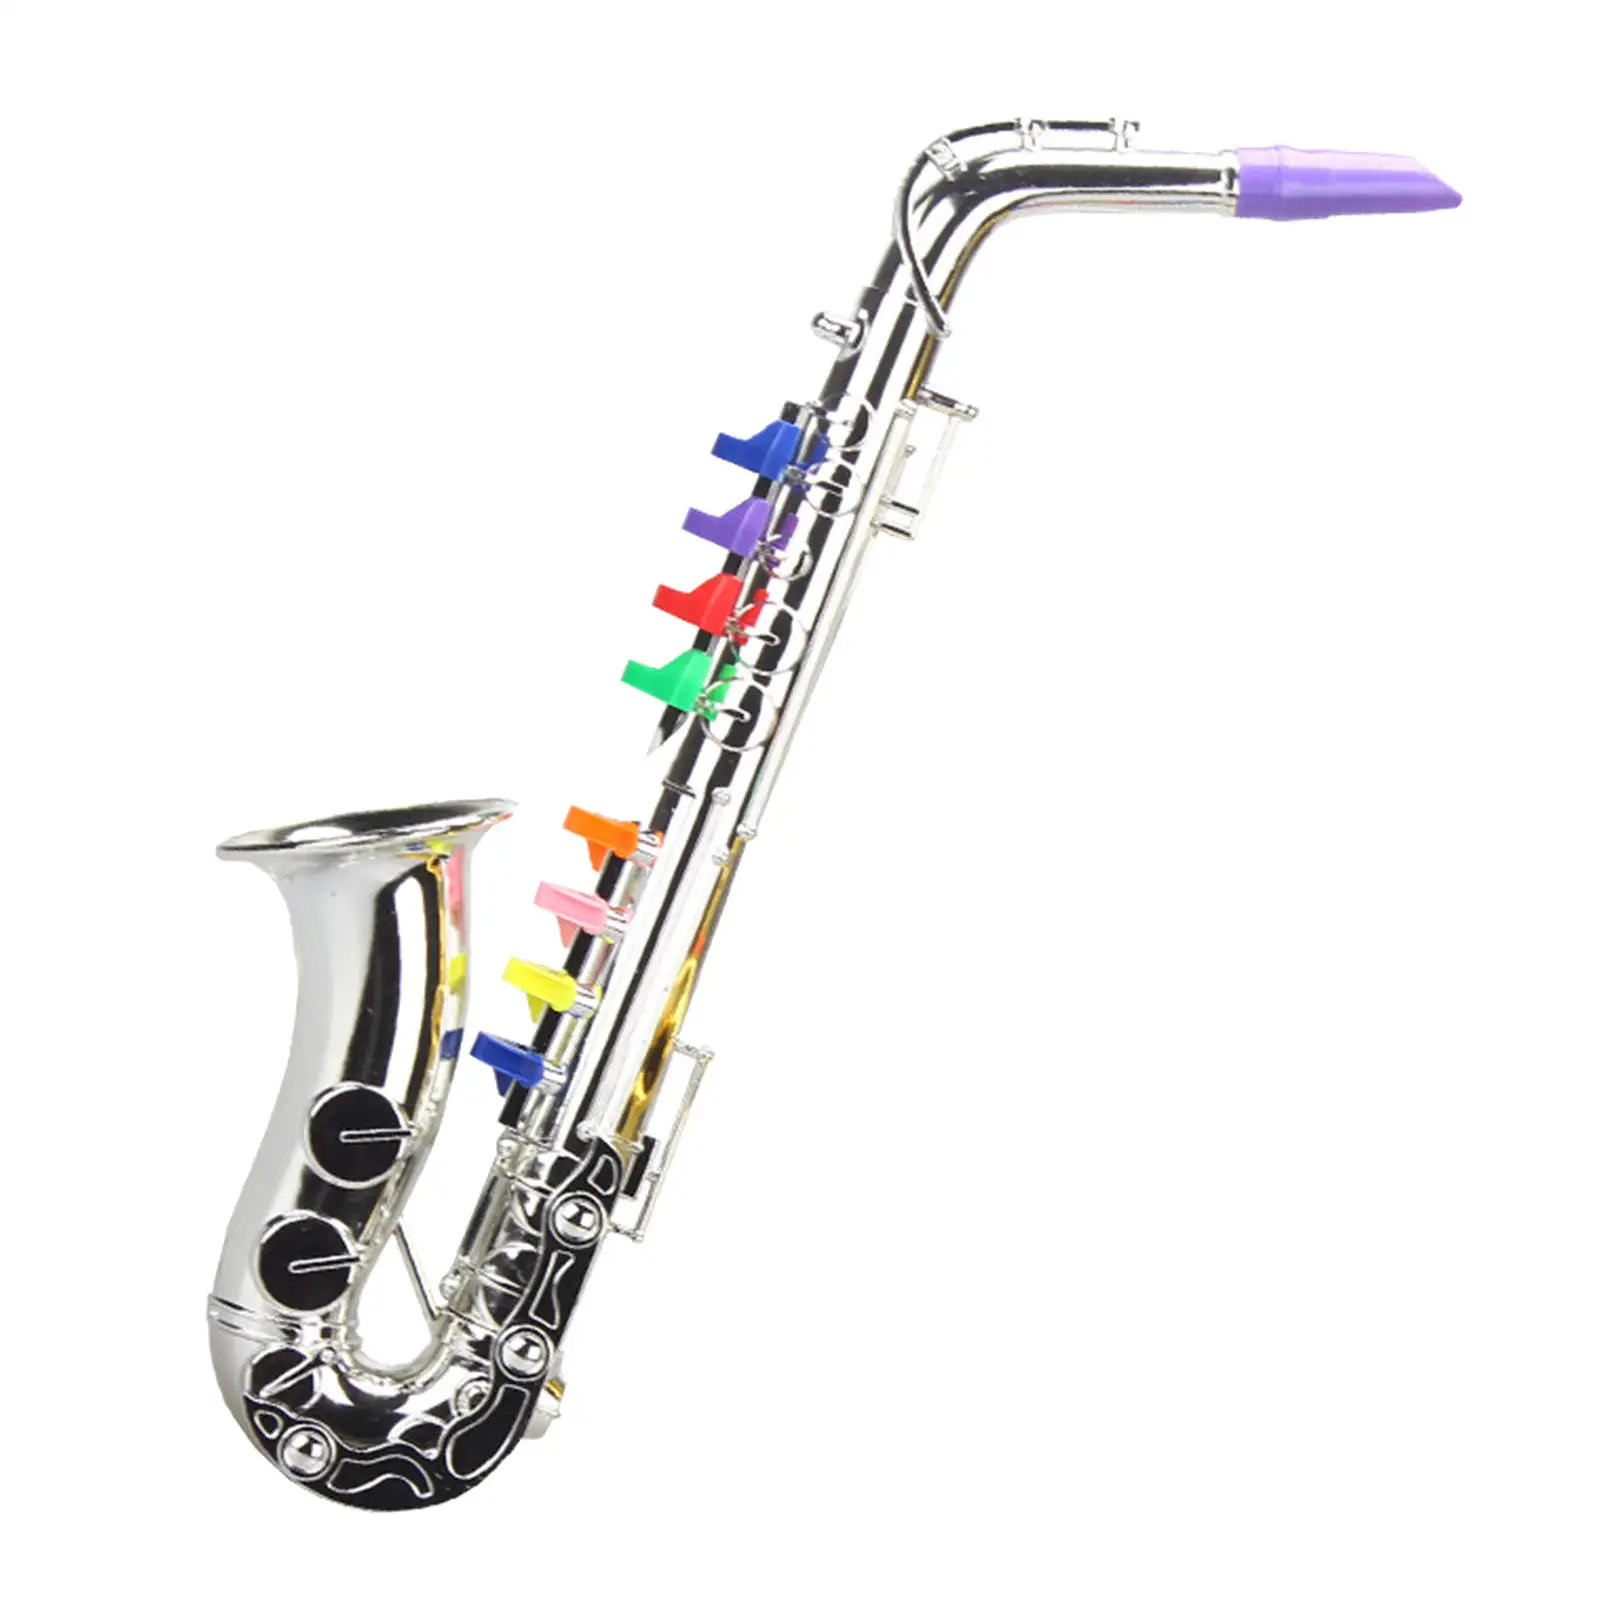 Saxophone Mini 8 Notes ABS Metallic Musical Wind Instruments for Party Gifts Ages 3+ Kids